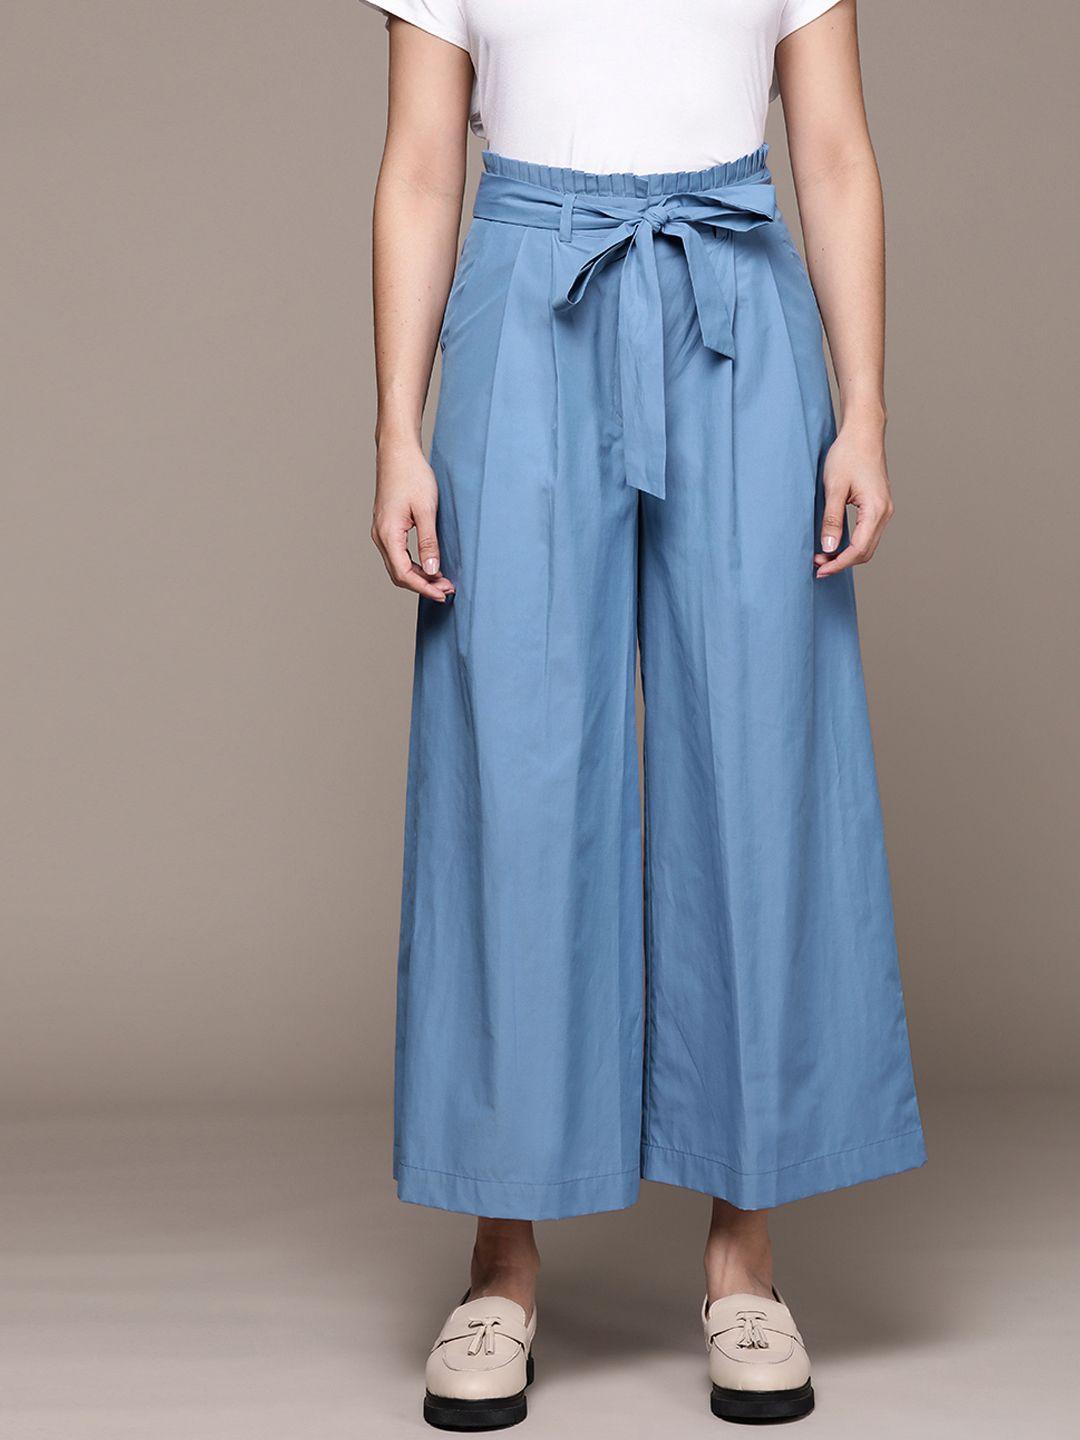 label ritu kumar women relaxed loose fit pleated culottes trousers with tie up detail